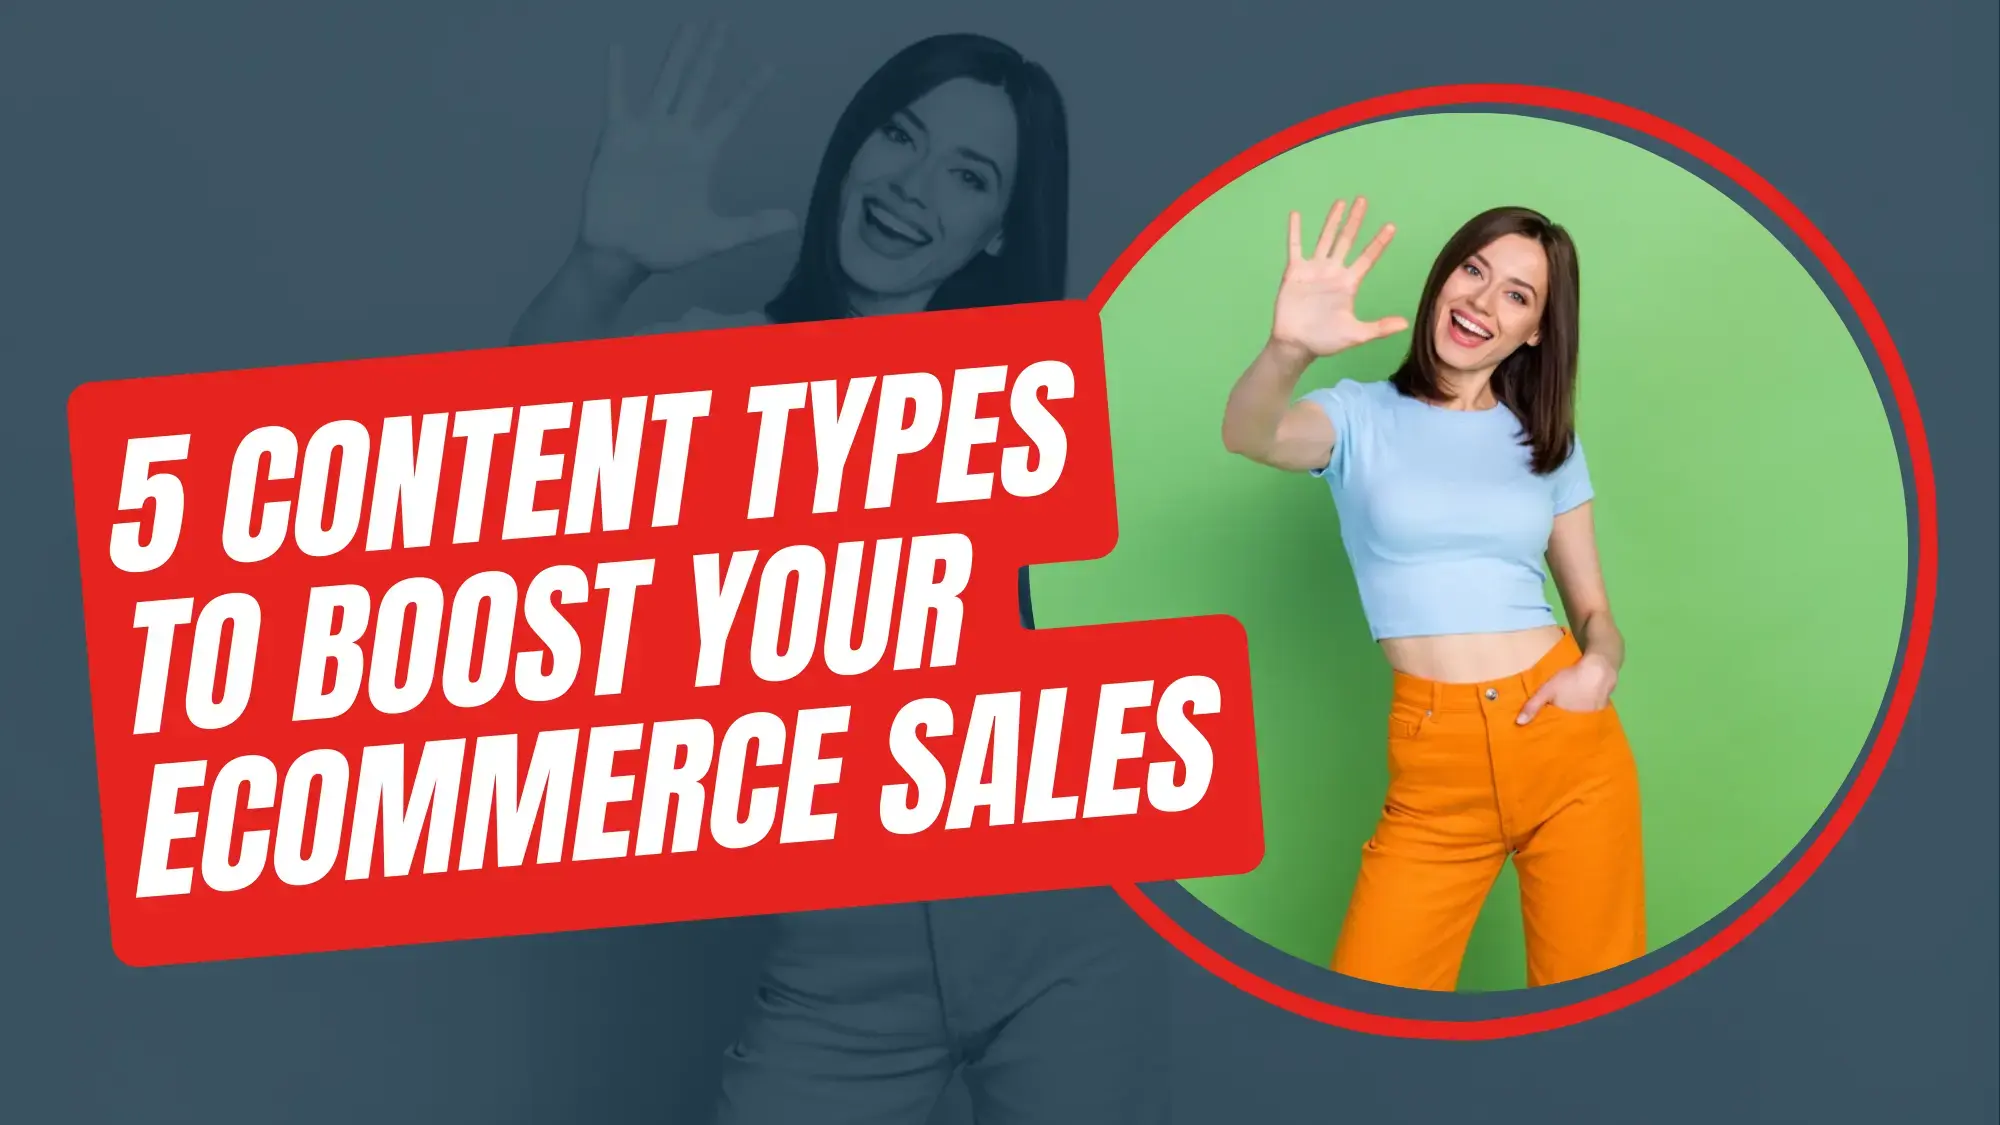 5 CONTENT TYPES TO BOOST YOUR ECOMMERCE SALES